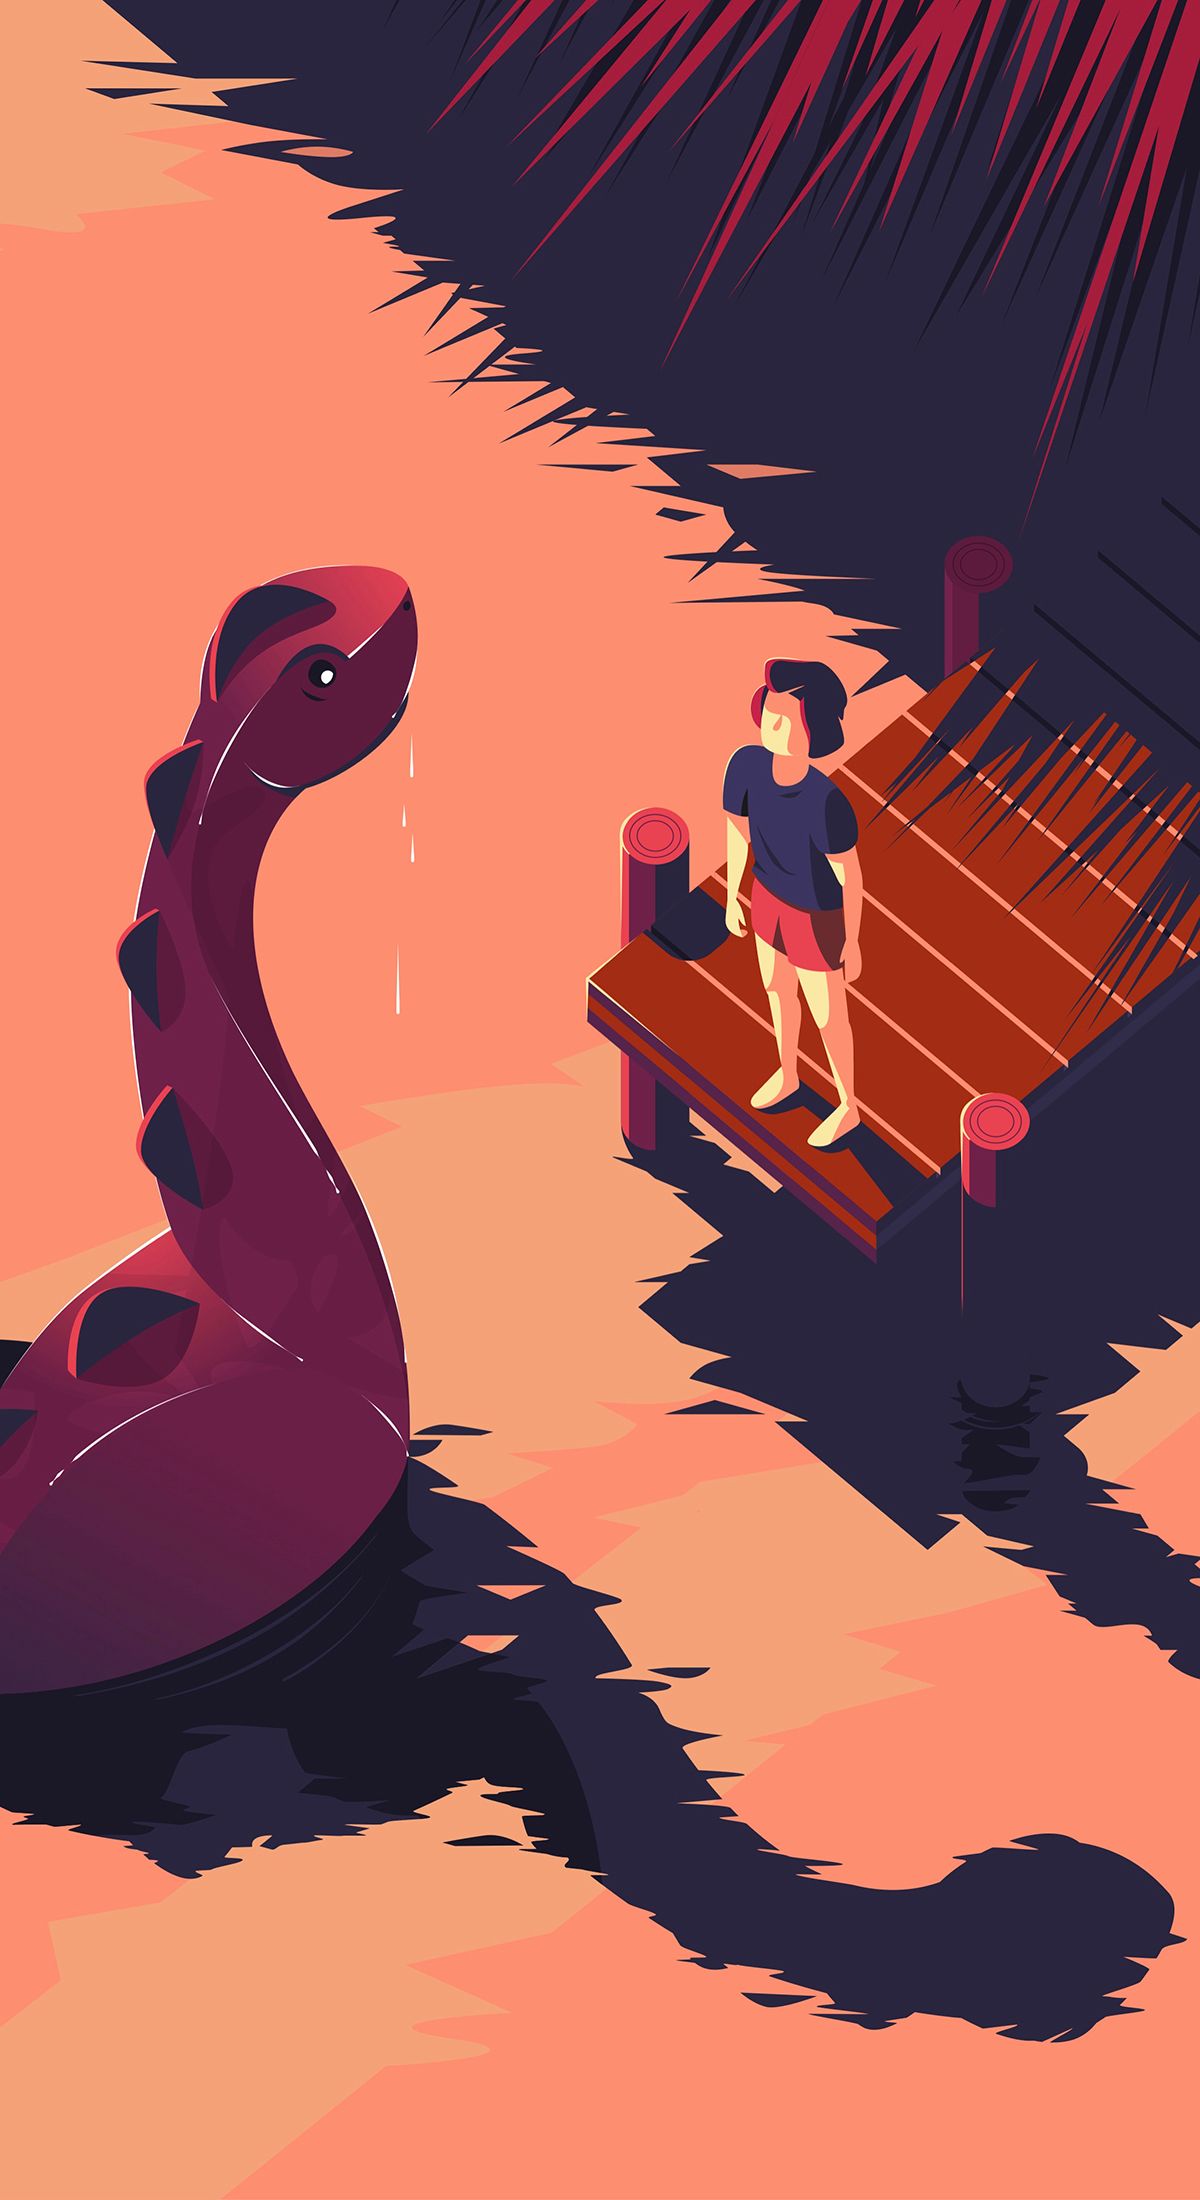 Illustration of a person on a dock looking at a large sea creature in the water at sunset